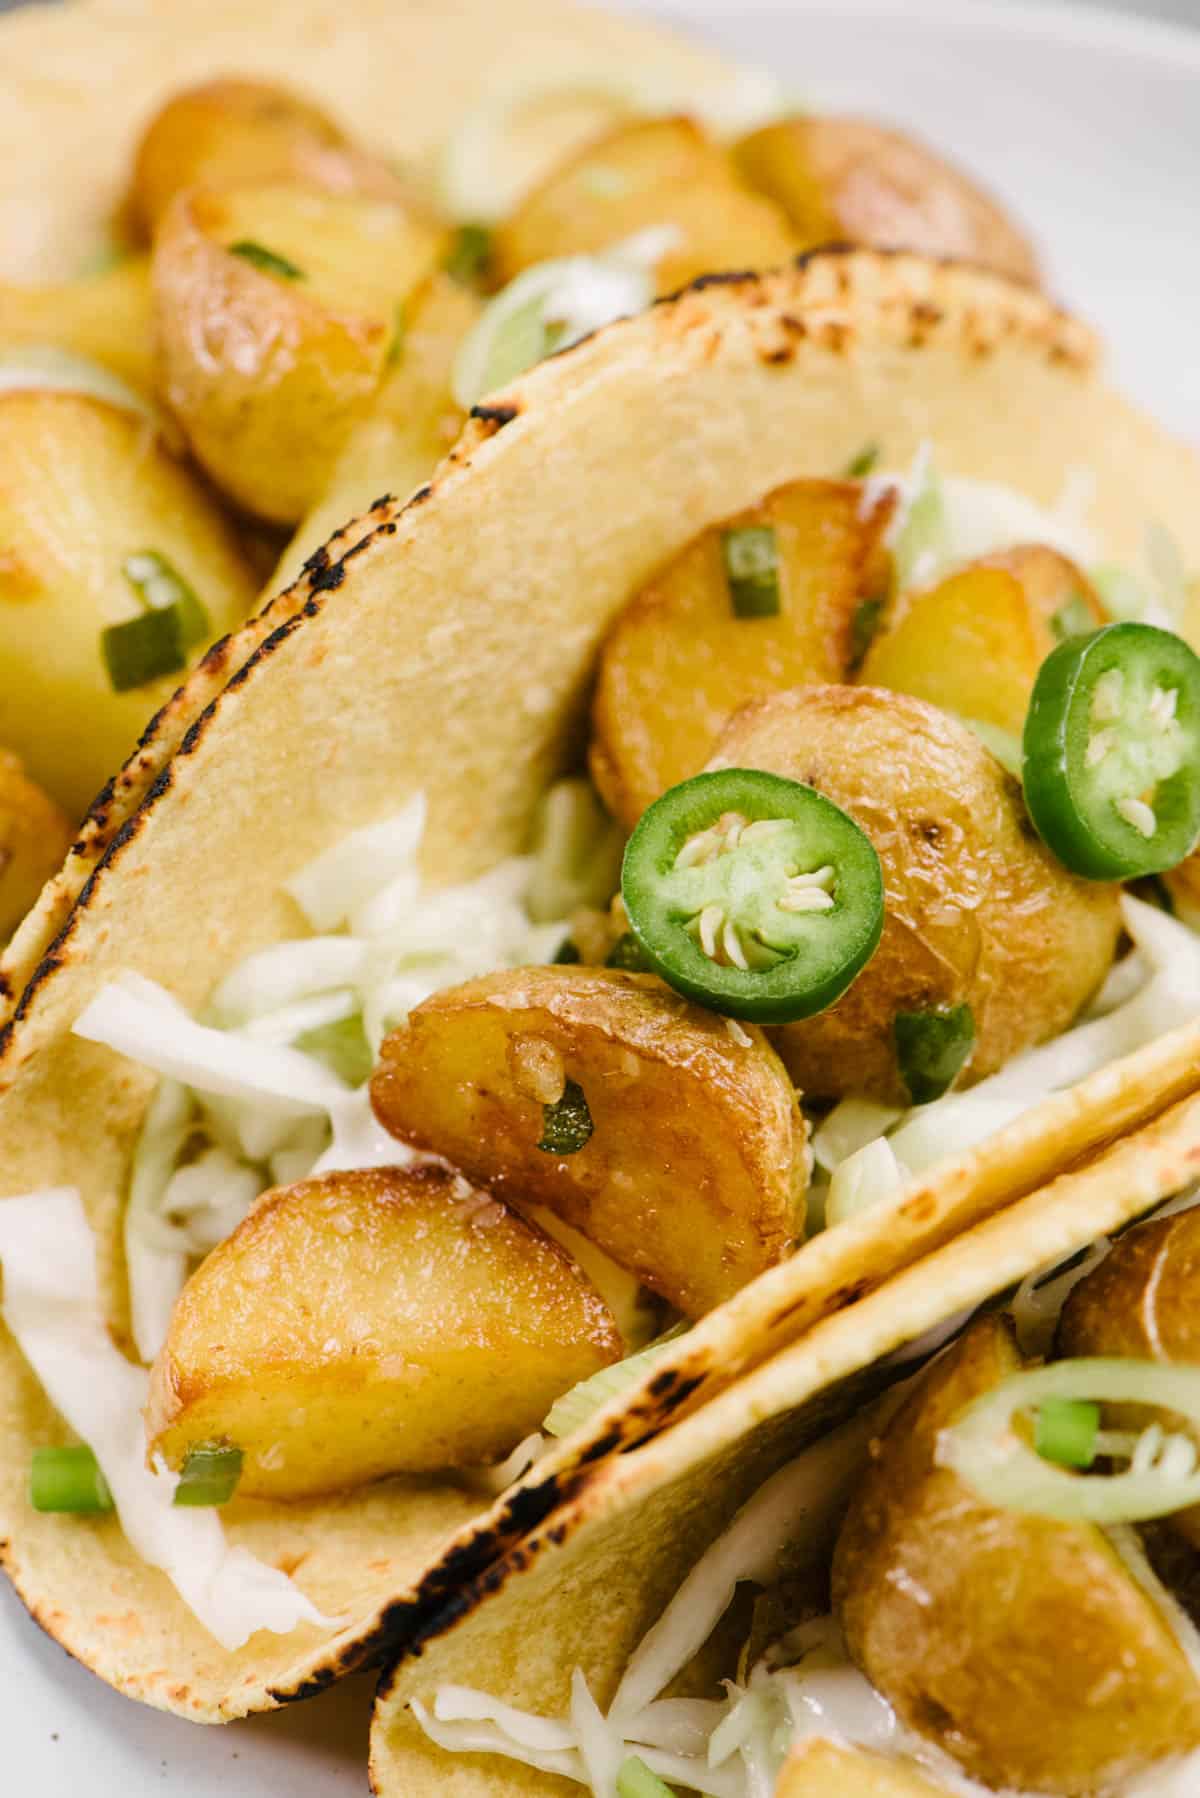 Side view, a close up view of potato tacos made with corn tortillas, lime coleslaw, sour cream, spicy yukon gold potatoes, and serrano chilies.